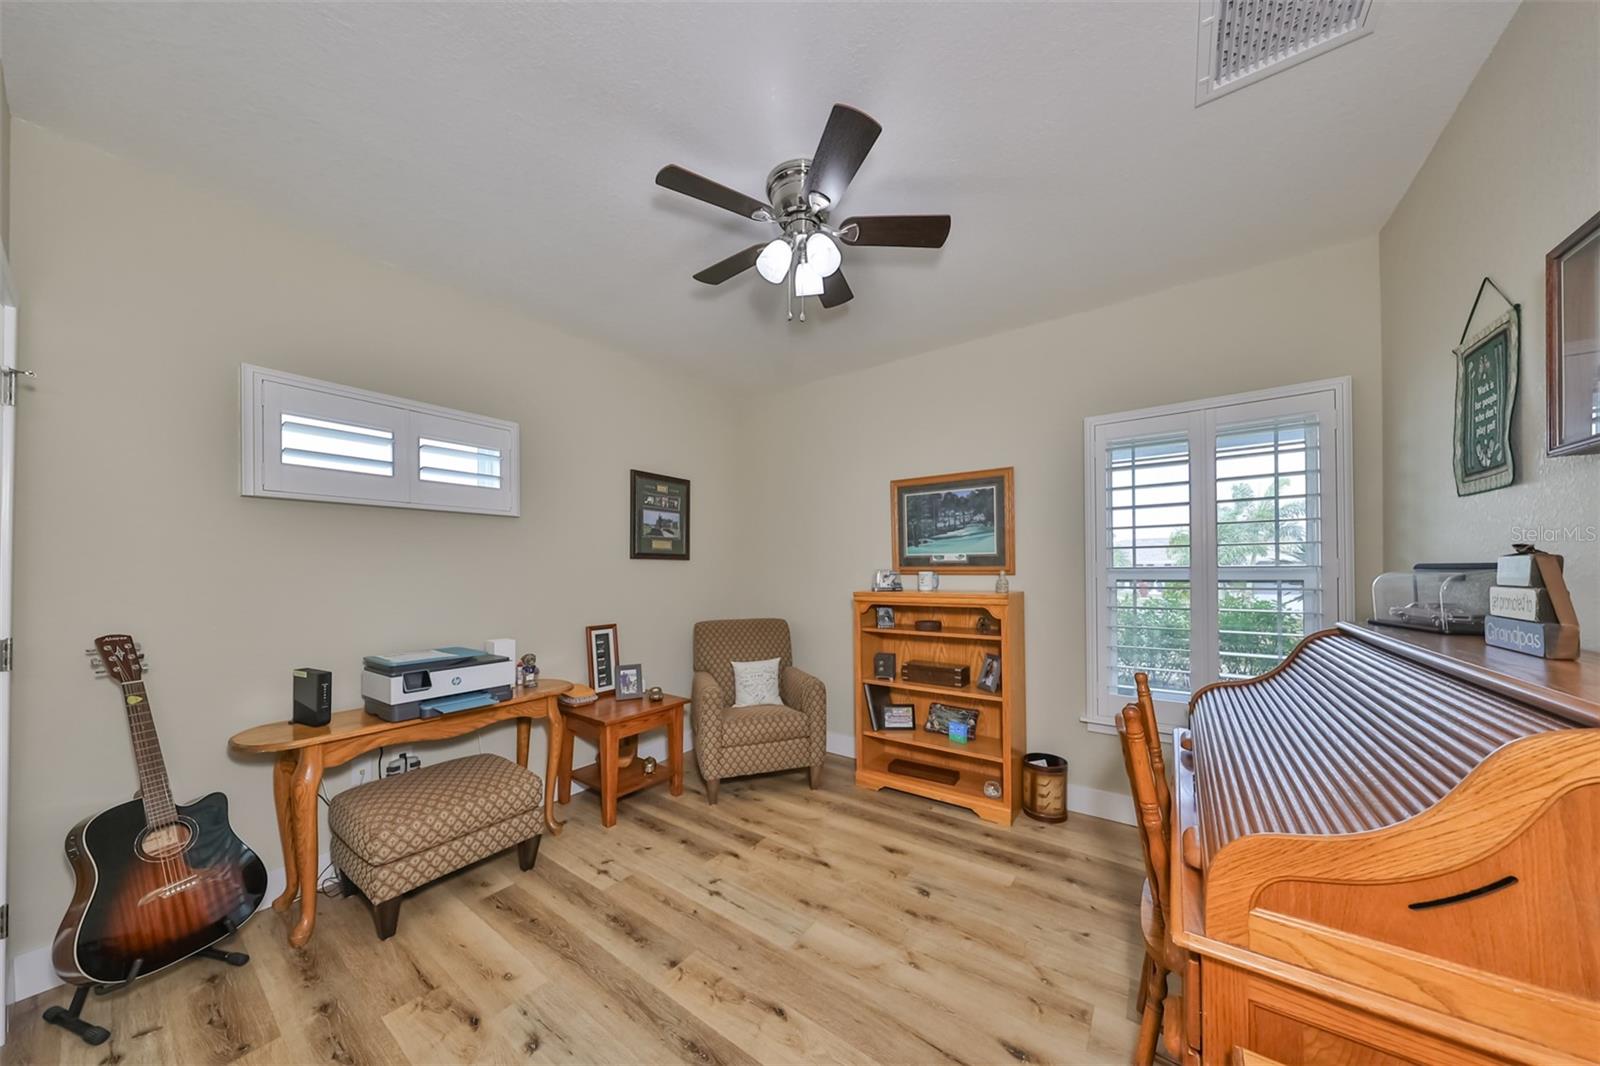 Office/Bedroom offers additional brightness from both the ceiling fan lighting and windows.